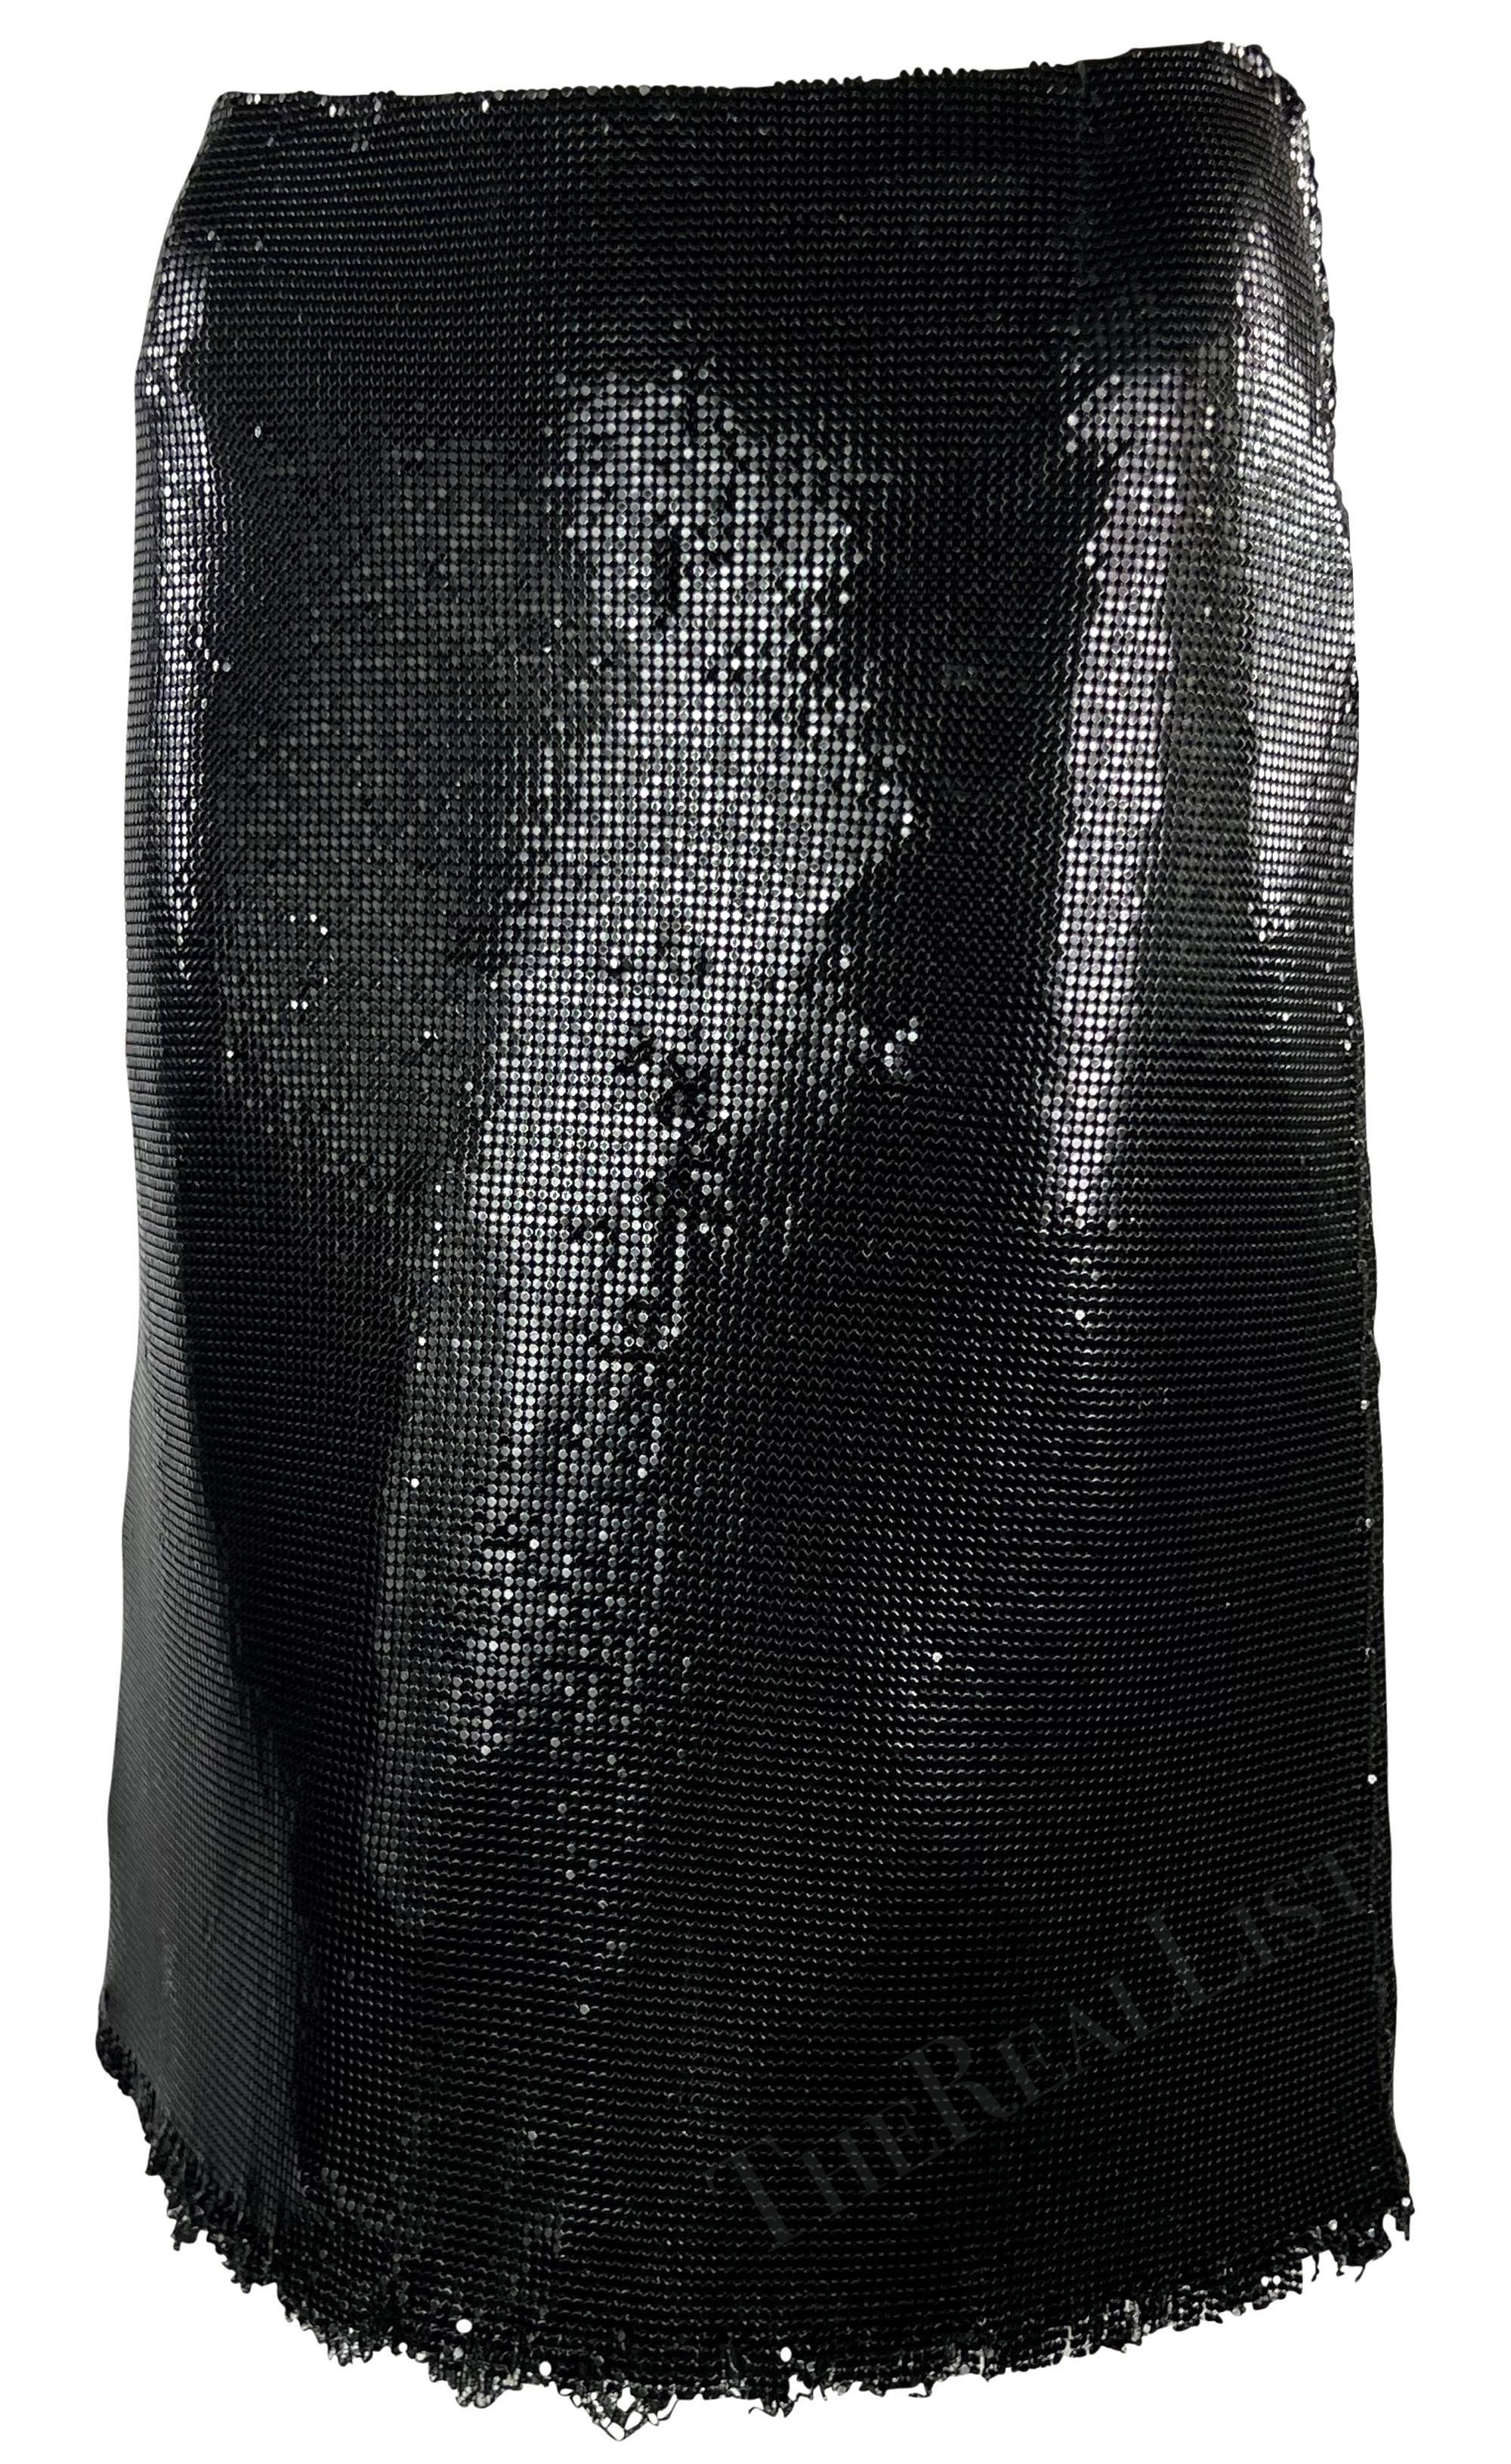 Constructed entirely of shimmery black Oroton chain mail, this Gianni Versace skirt was designed by Donatella Versace for the Fall/Winter 1999 collection. Featuring an a-line silhouette, this fabulous skirt is made complete with a lightly fringed